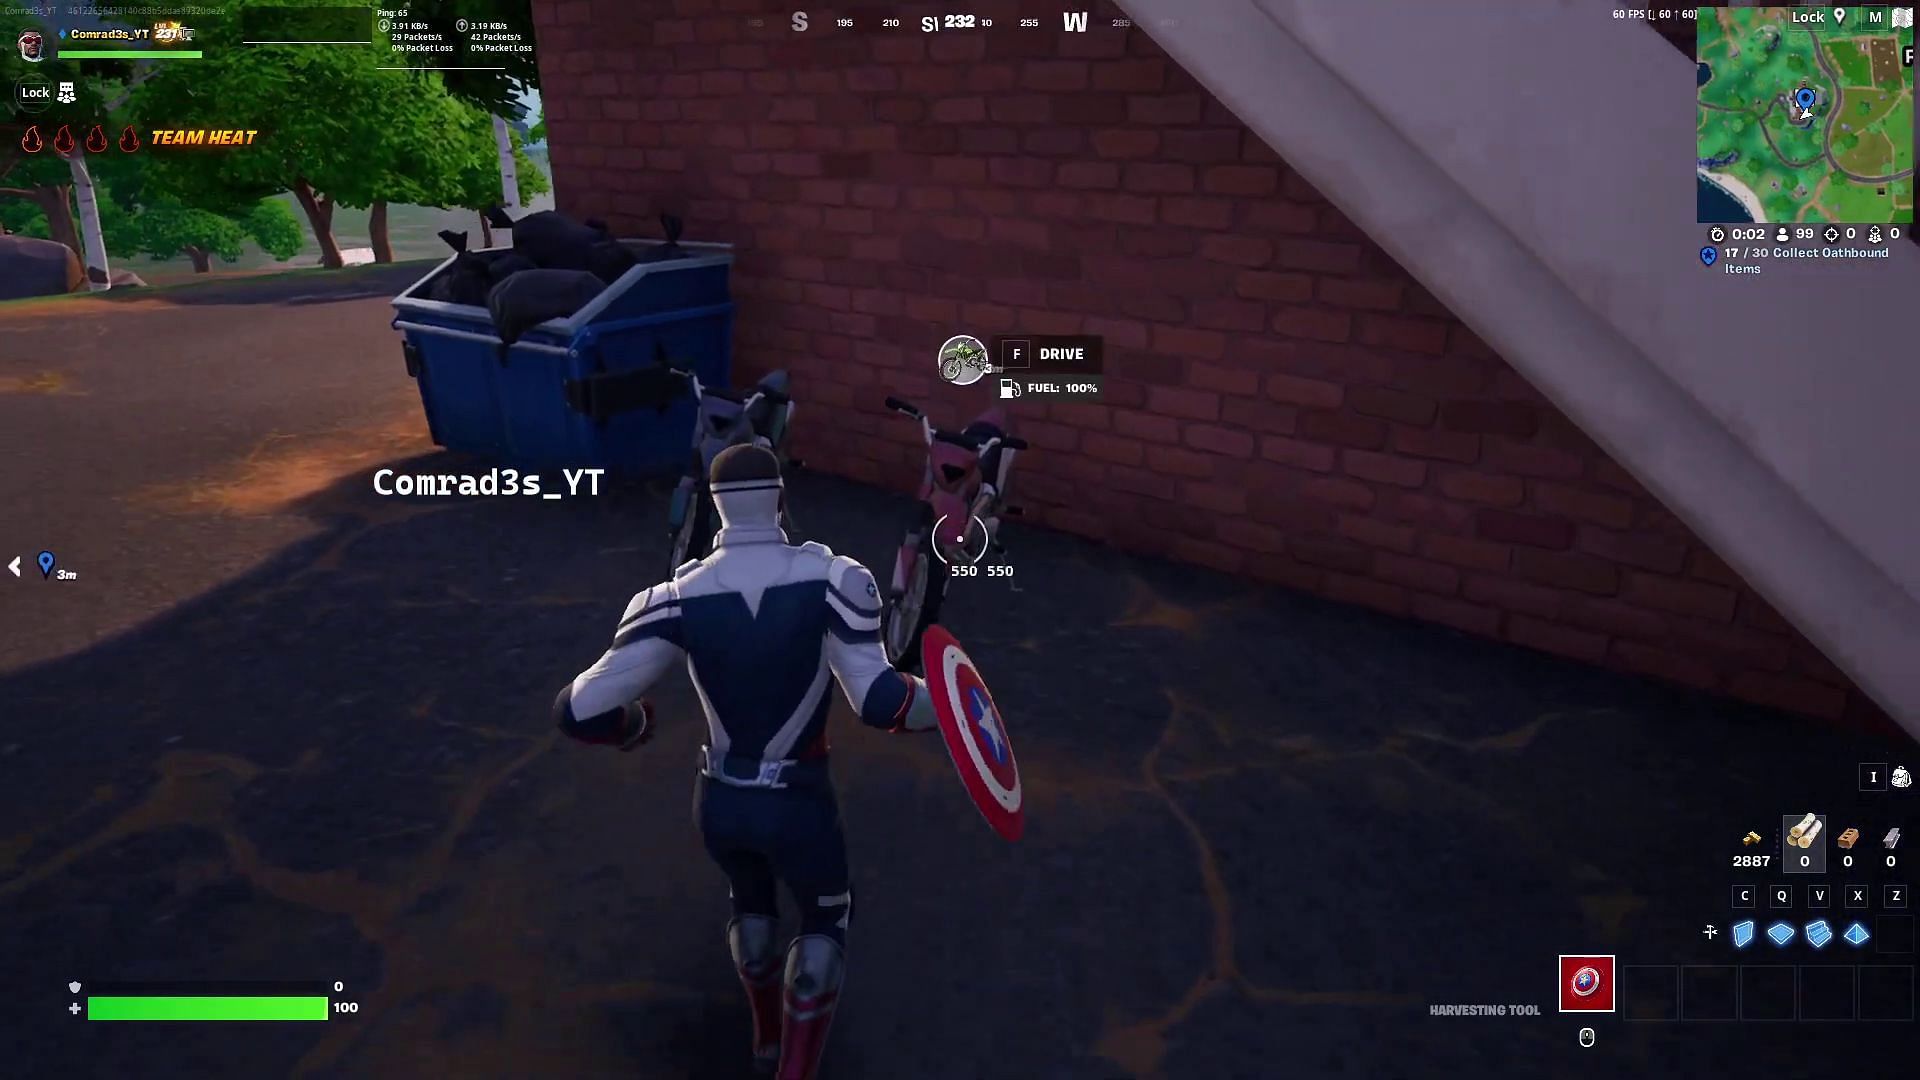 Interact with the Dirt Bike to ride it. (Image via YouTube/Comrad3s)